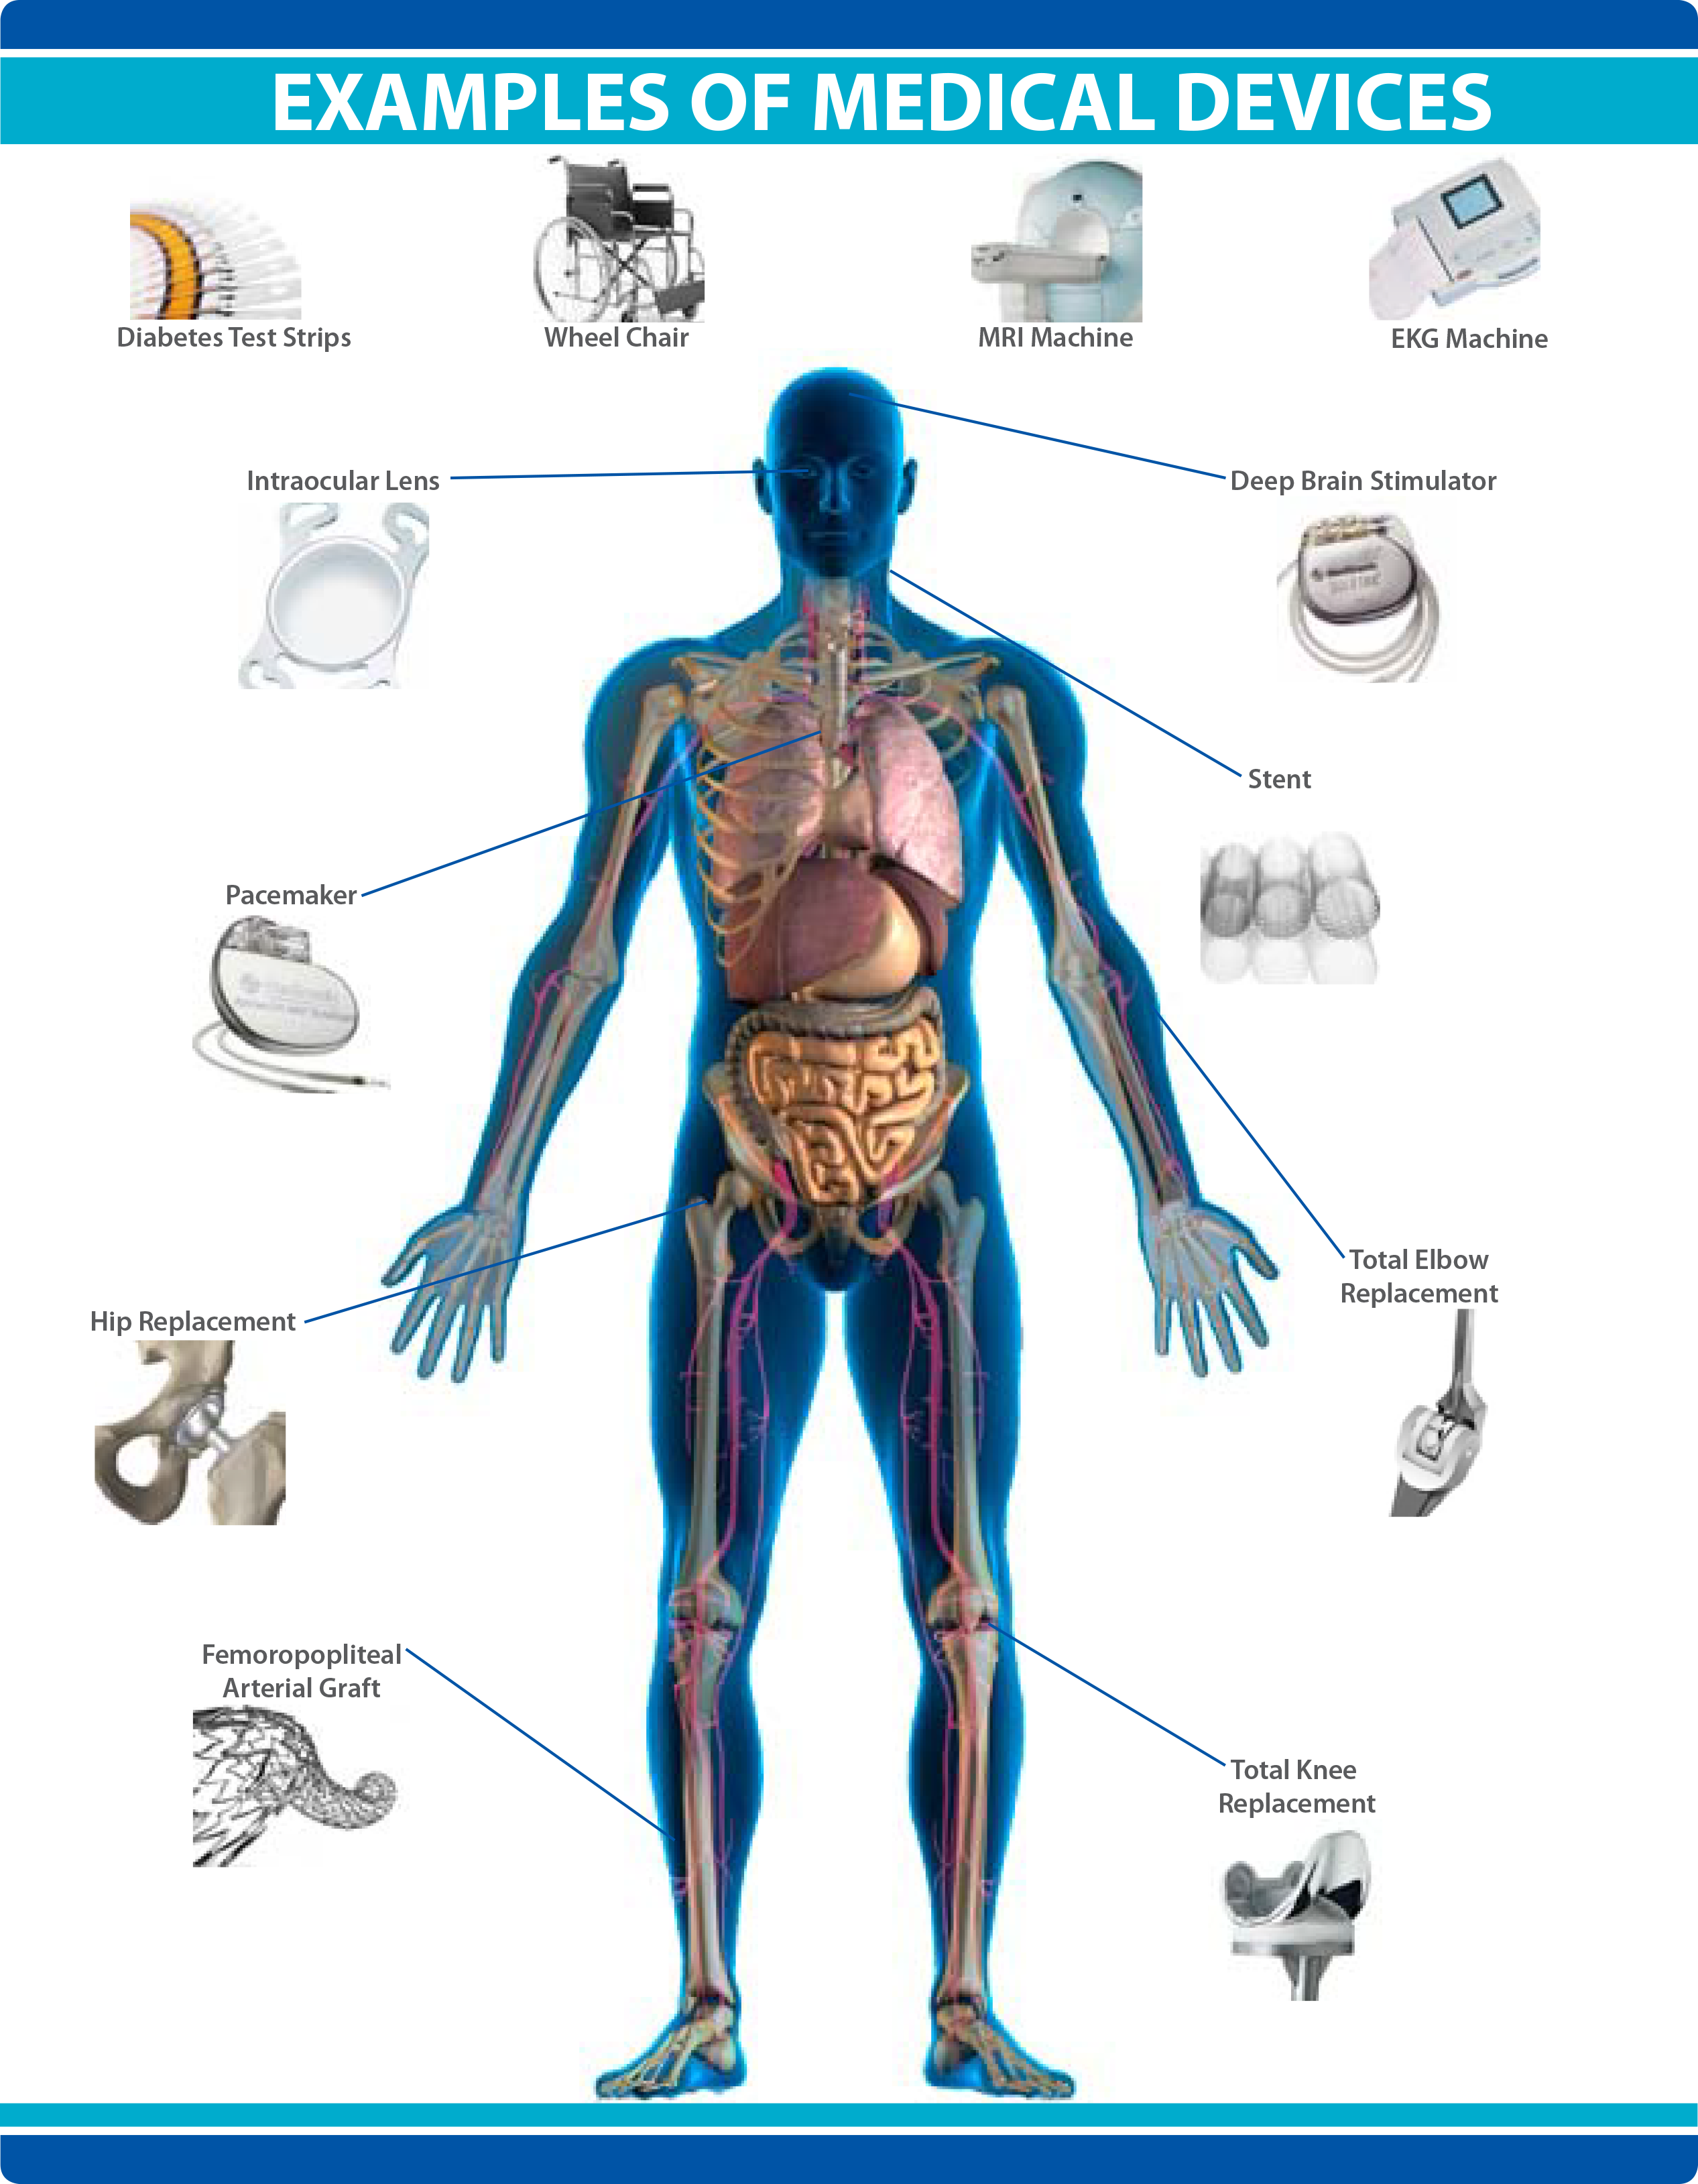 Examples of Medical Devices